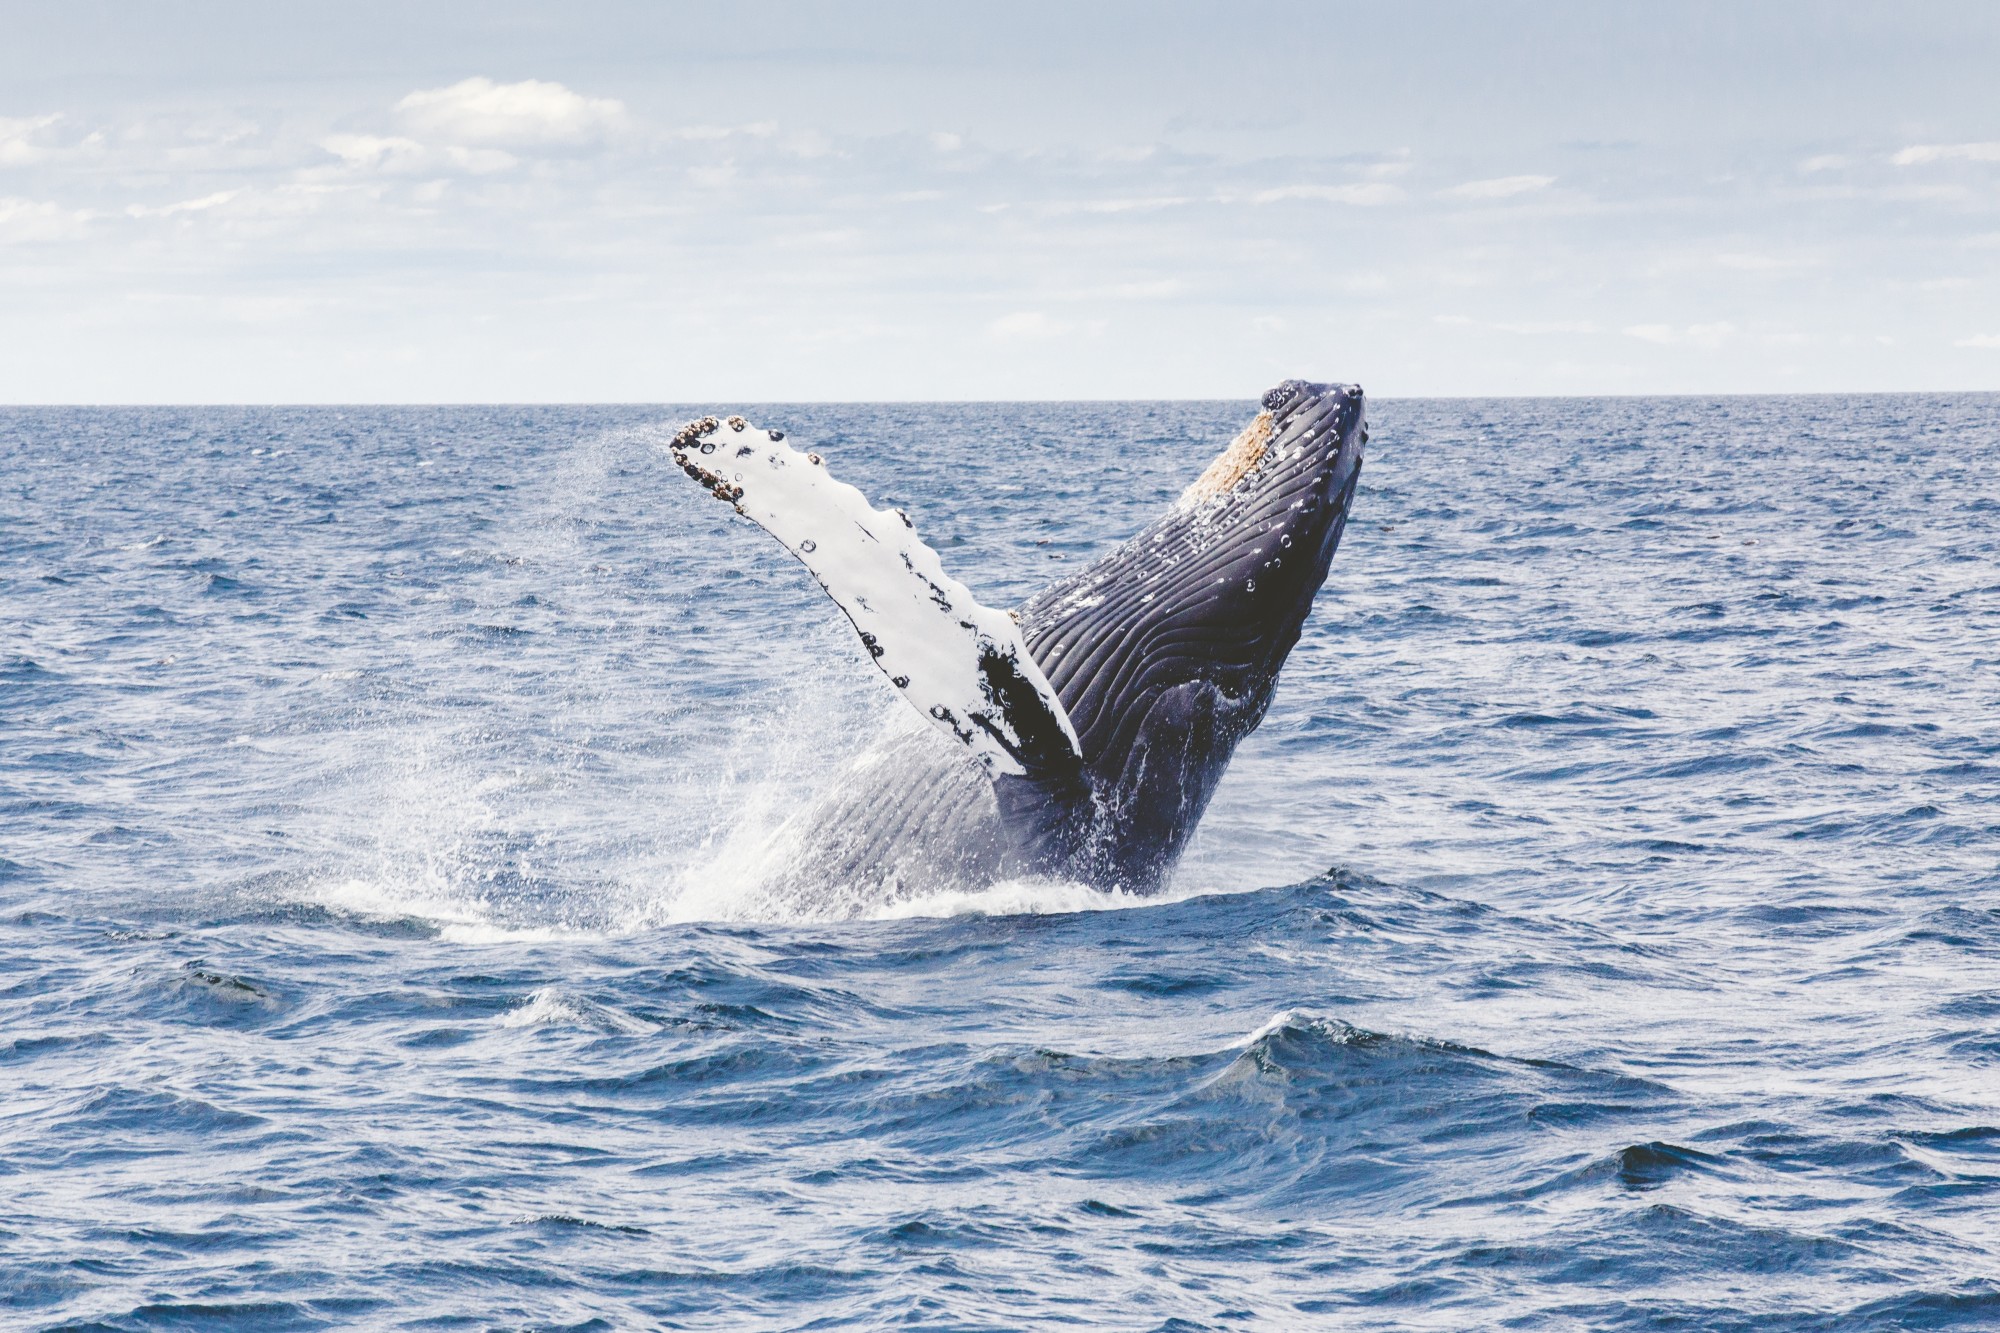 Whale Watching Spots in the World